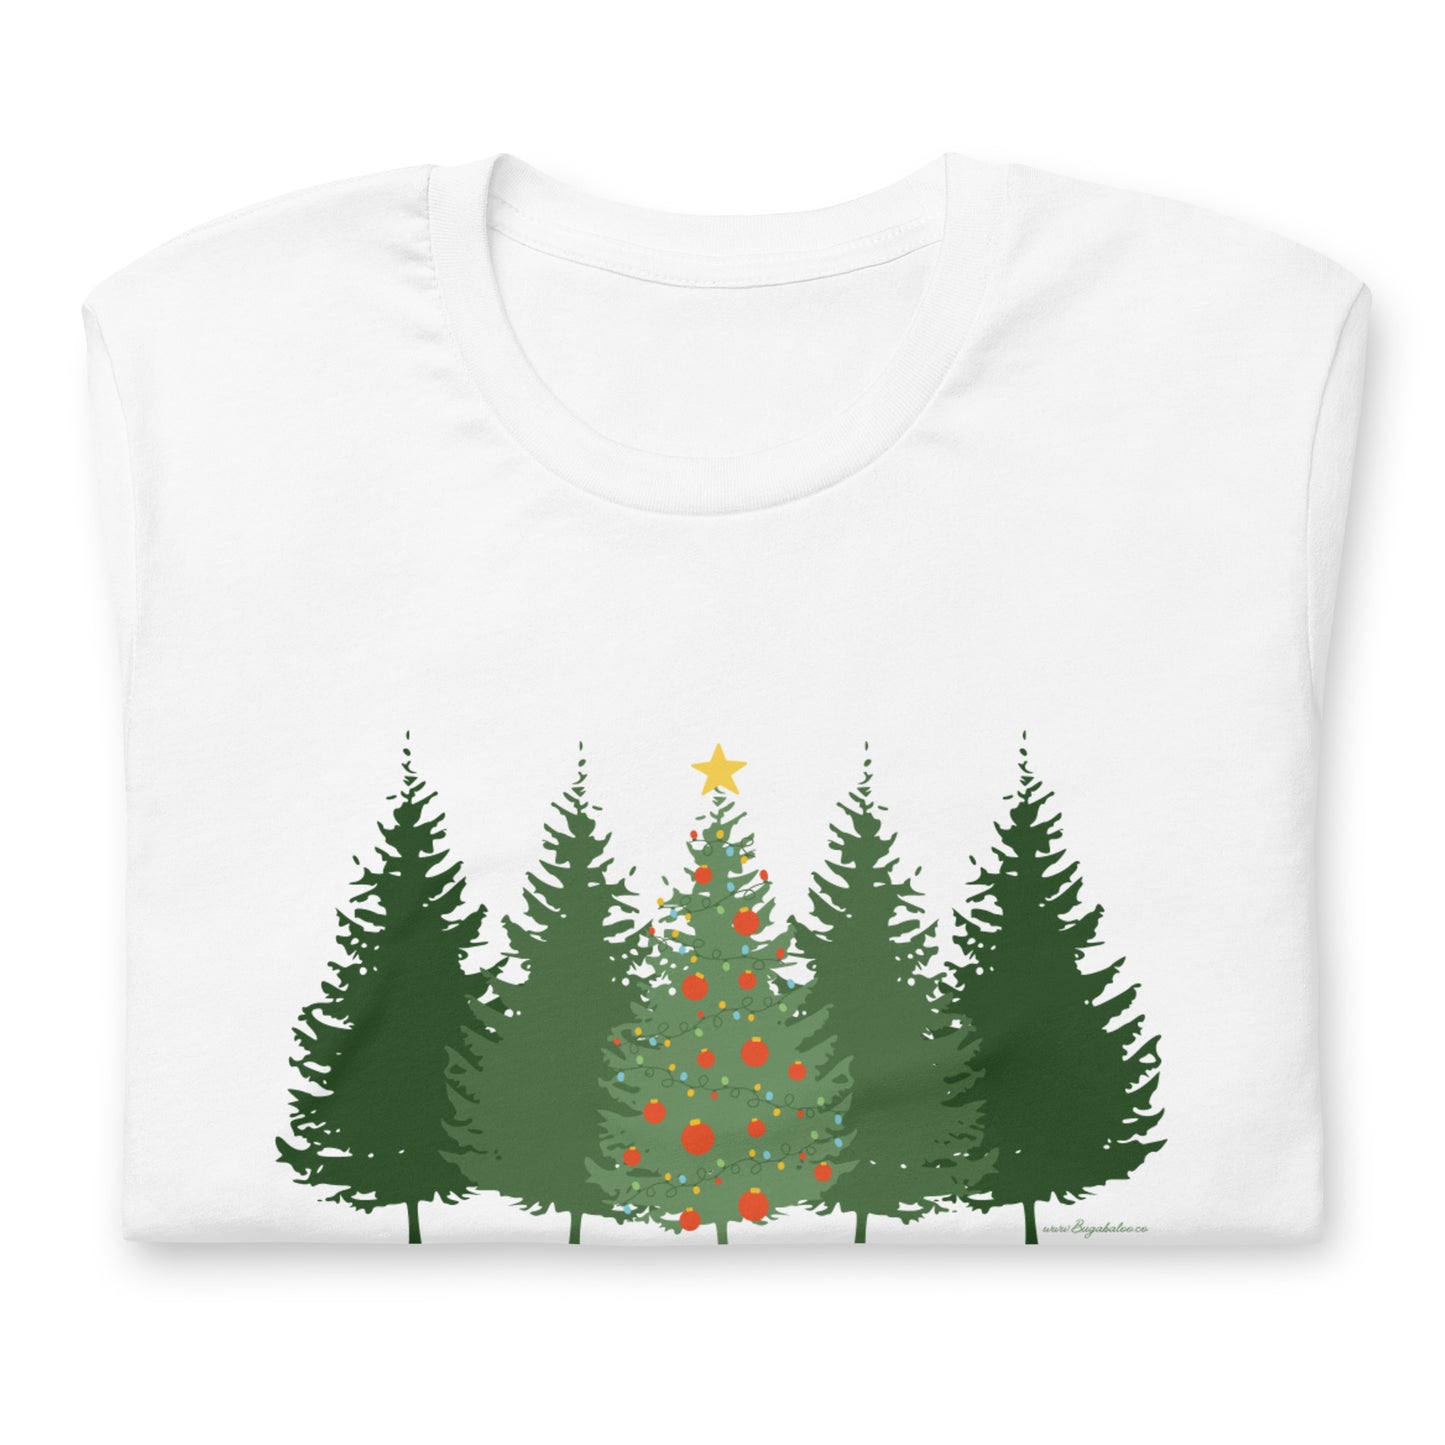 Merry and Bright Christmas Tree Unisex t-shirt